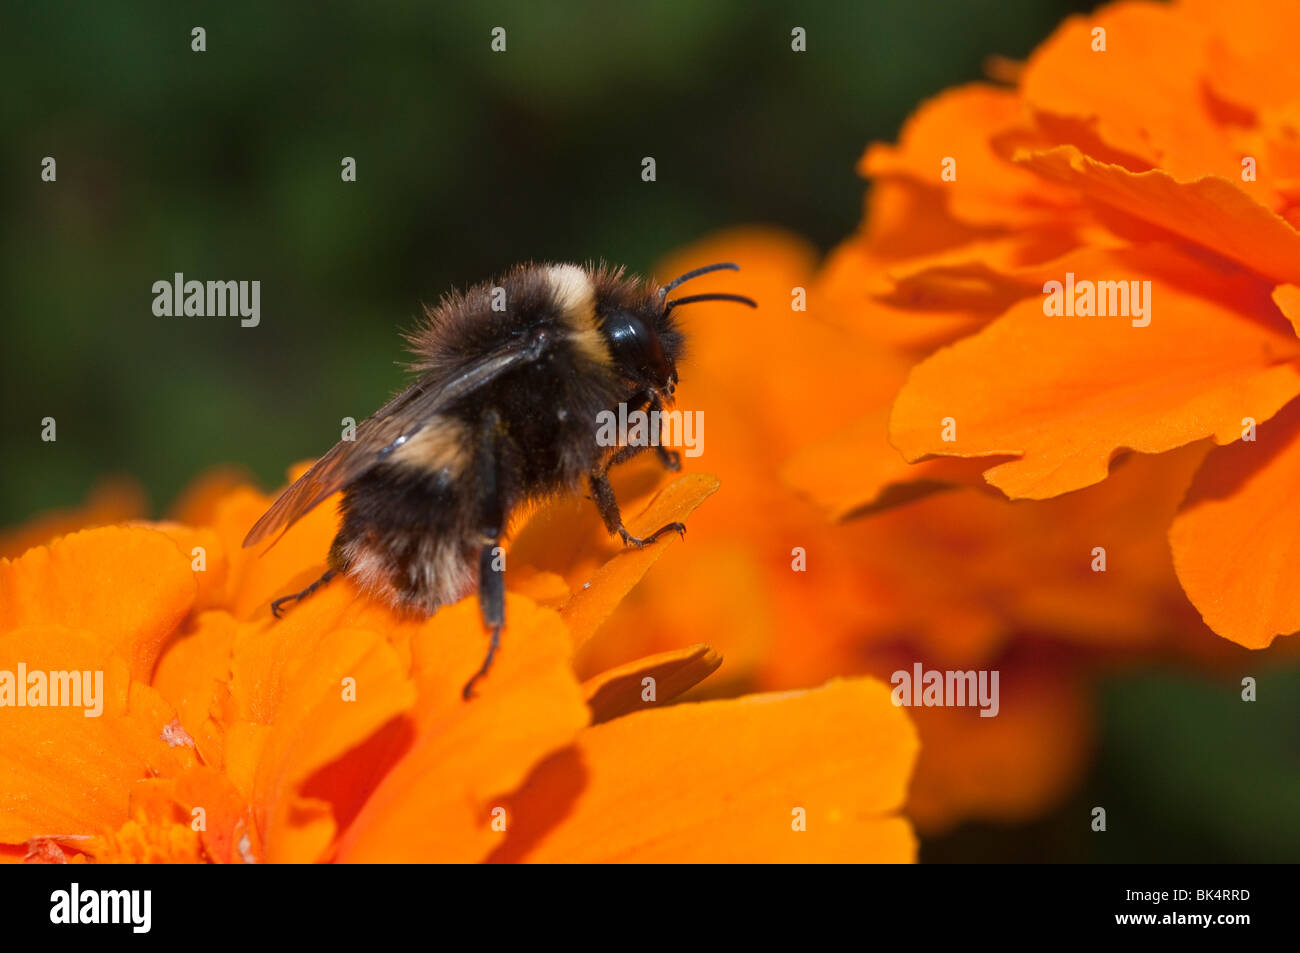 Bumble bee gathering pollen on marigold flowers Stock Photo